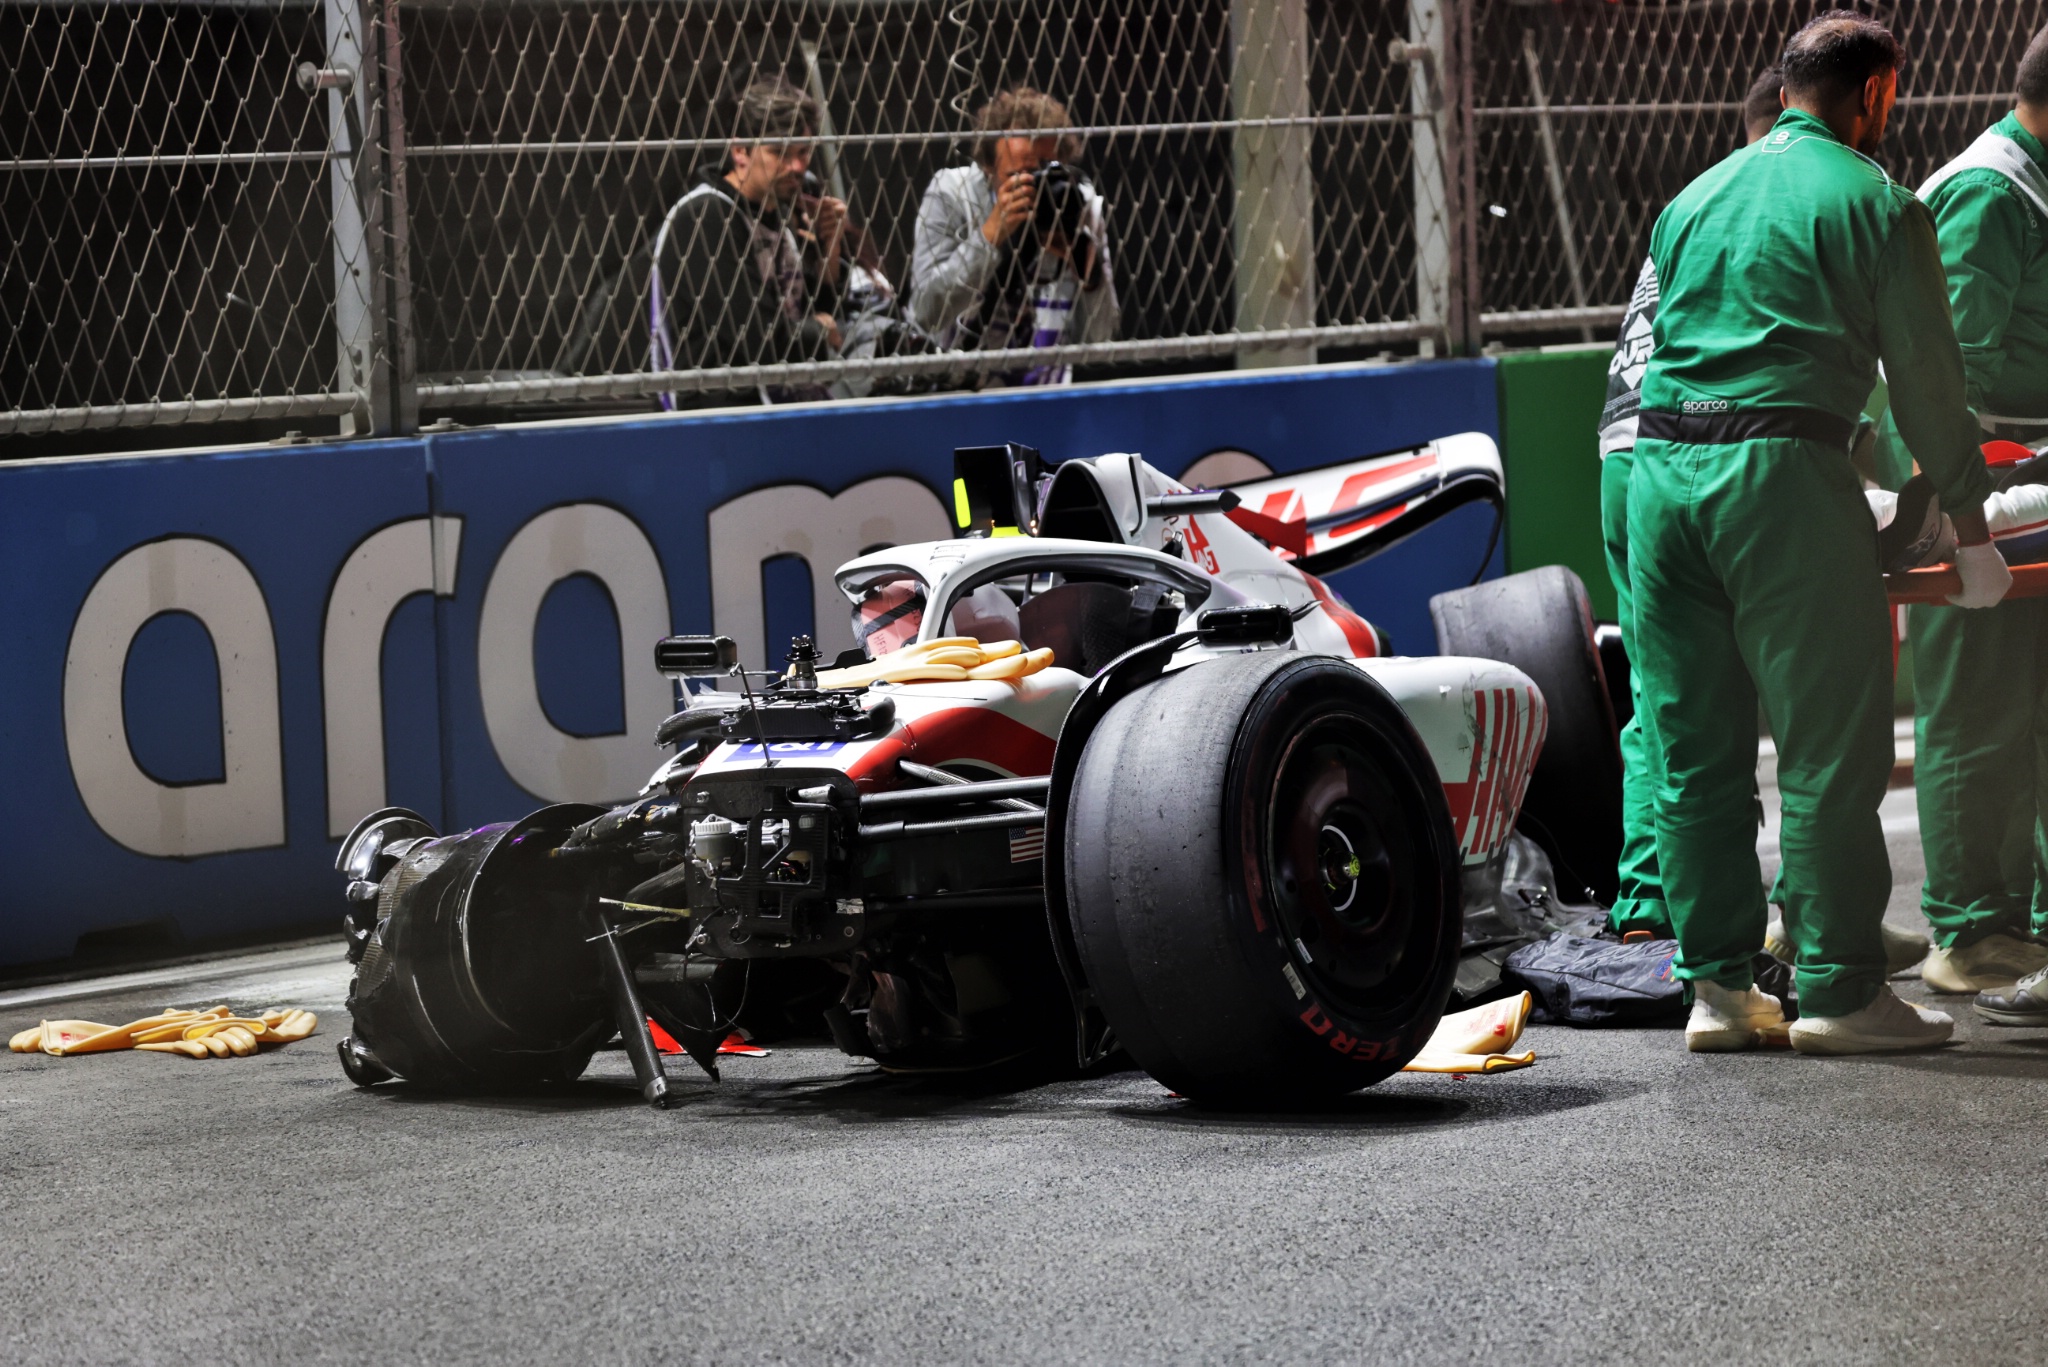 Mick Schumacher (GER) is extracted from his Haas VF-22 after he crashed during qualifying.